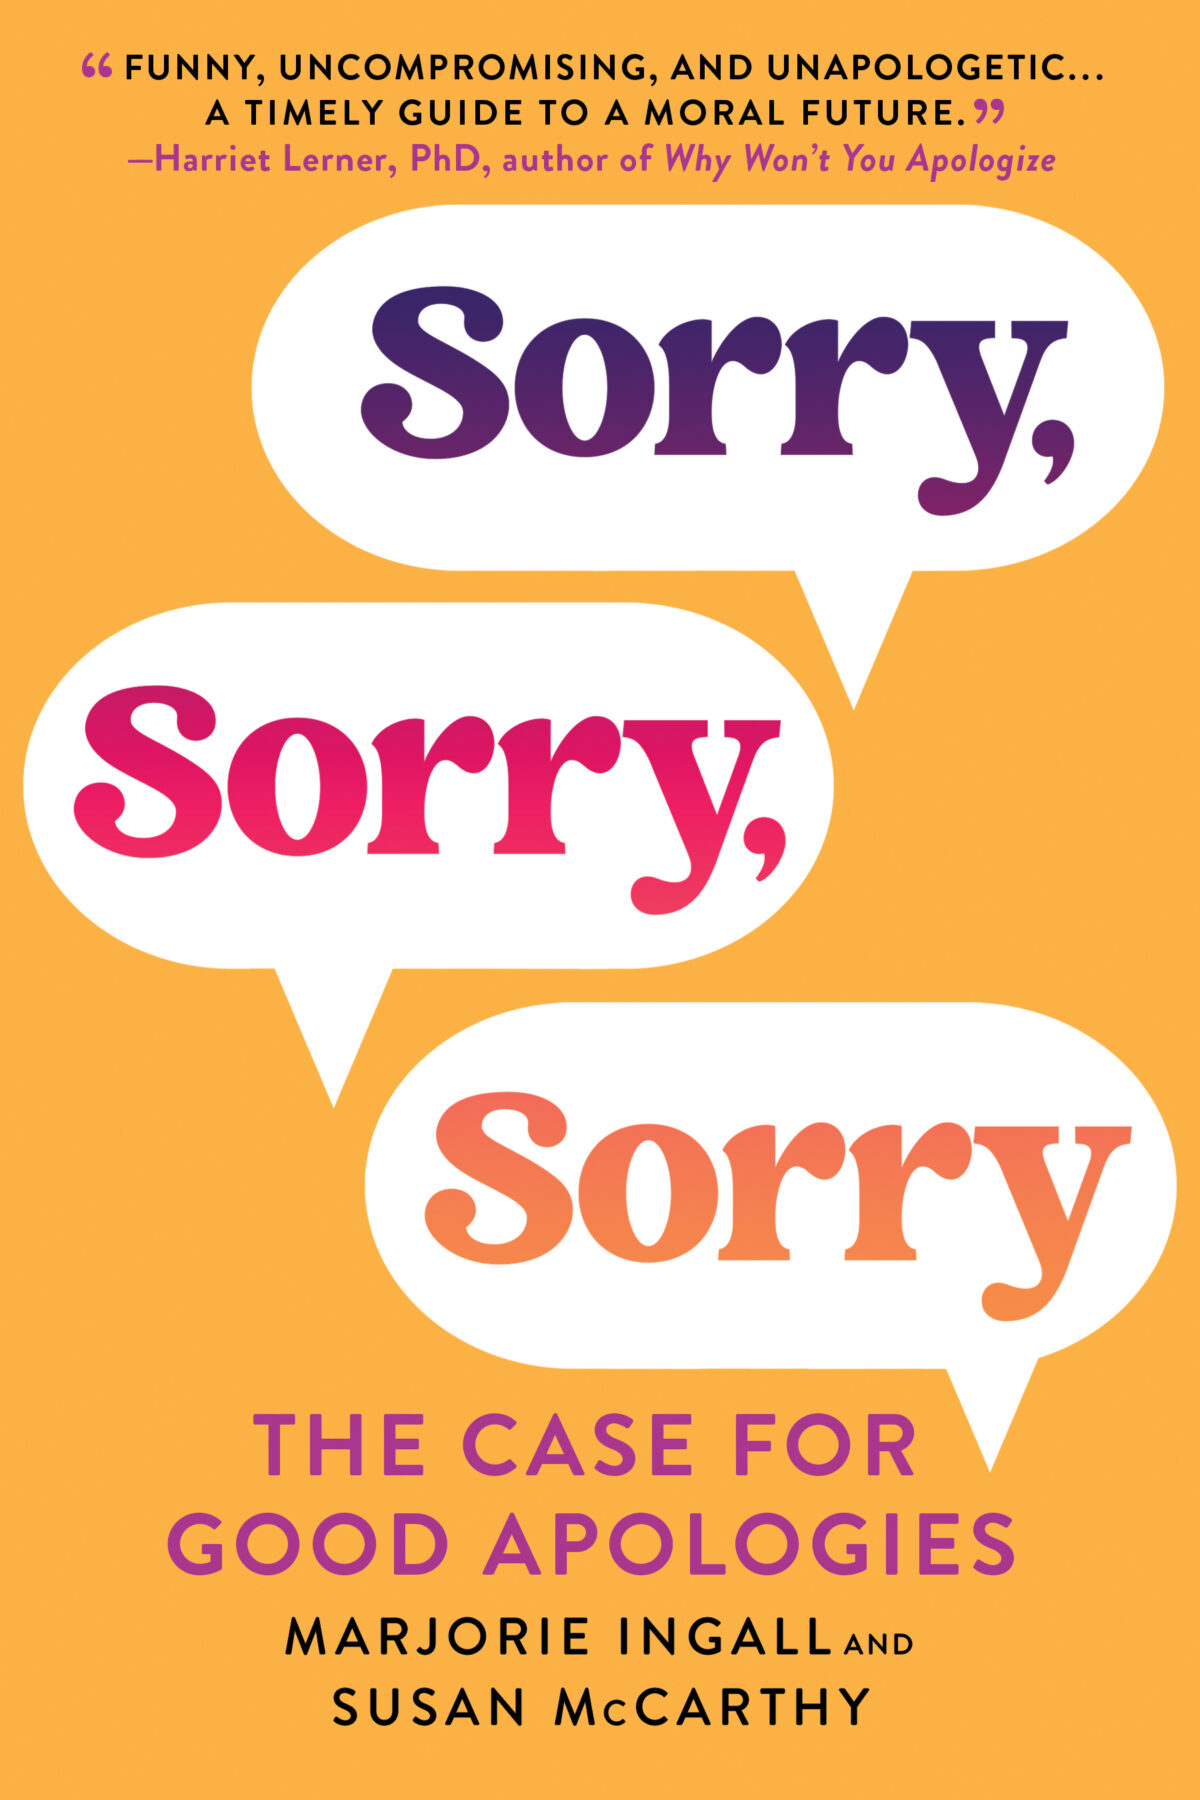 picture of book cover, which is orange, with the title Sorry, Sorry, Sorry in gradient purple, fuchsia, and darker orange. 